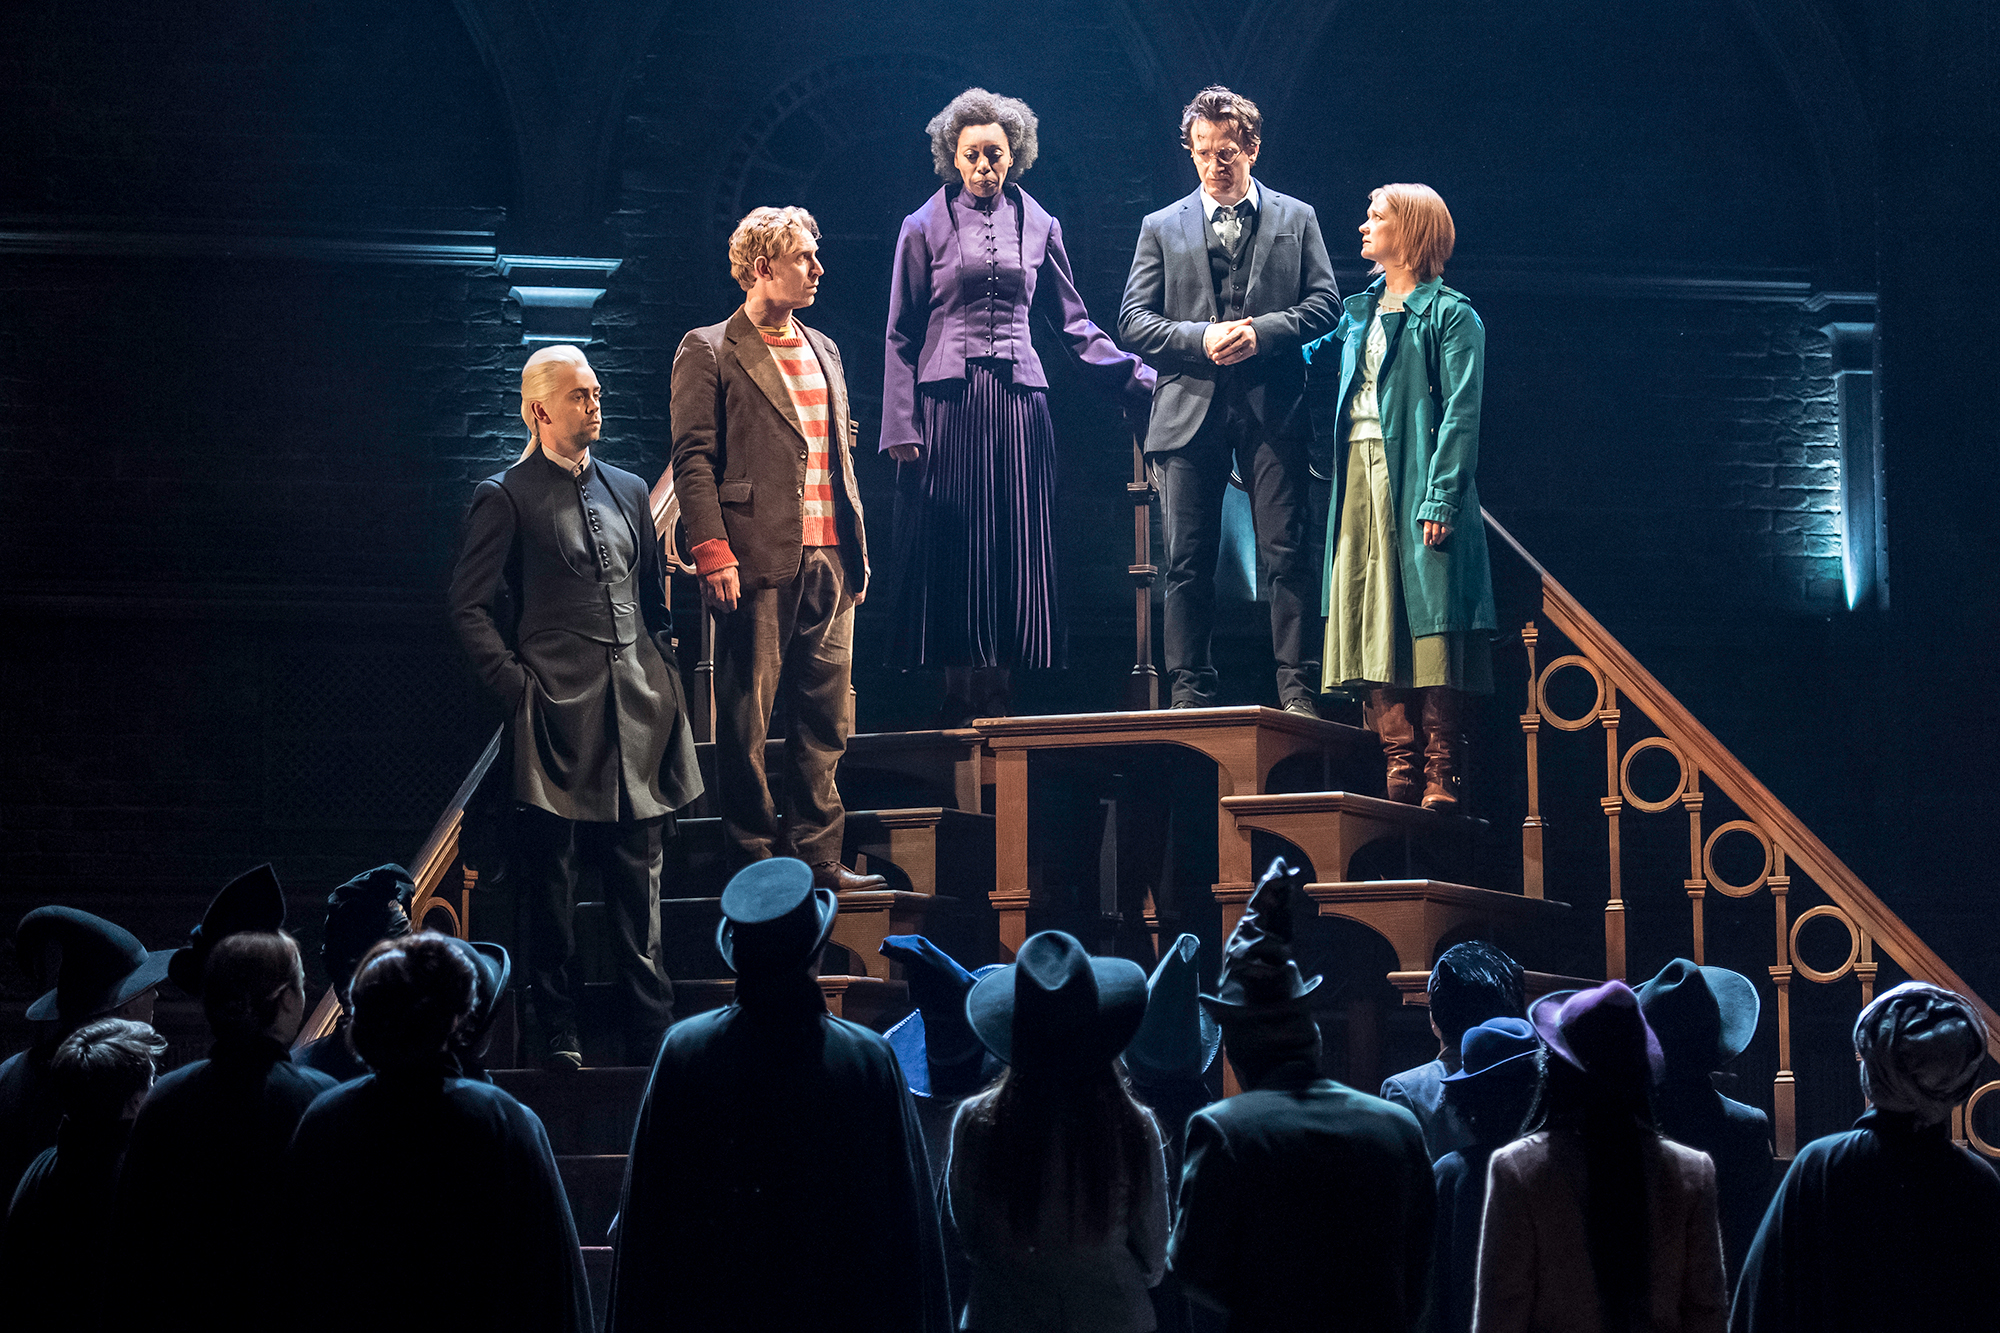 From left: Alex Price as Draco Malfoy, Paul Thornley as Ron Weasley, Noma Dumezweni as Hermione Granger, Jamie Parker as Harry Potter, and Poppy Miller as Ginny Potter in Harry Potter and the Cursed Child.